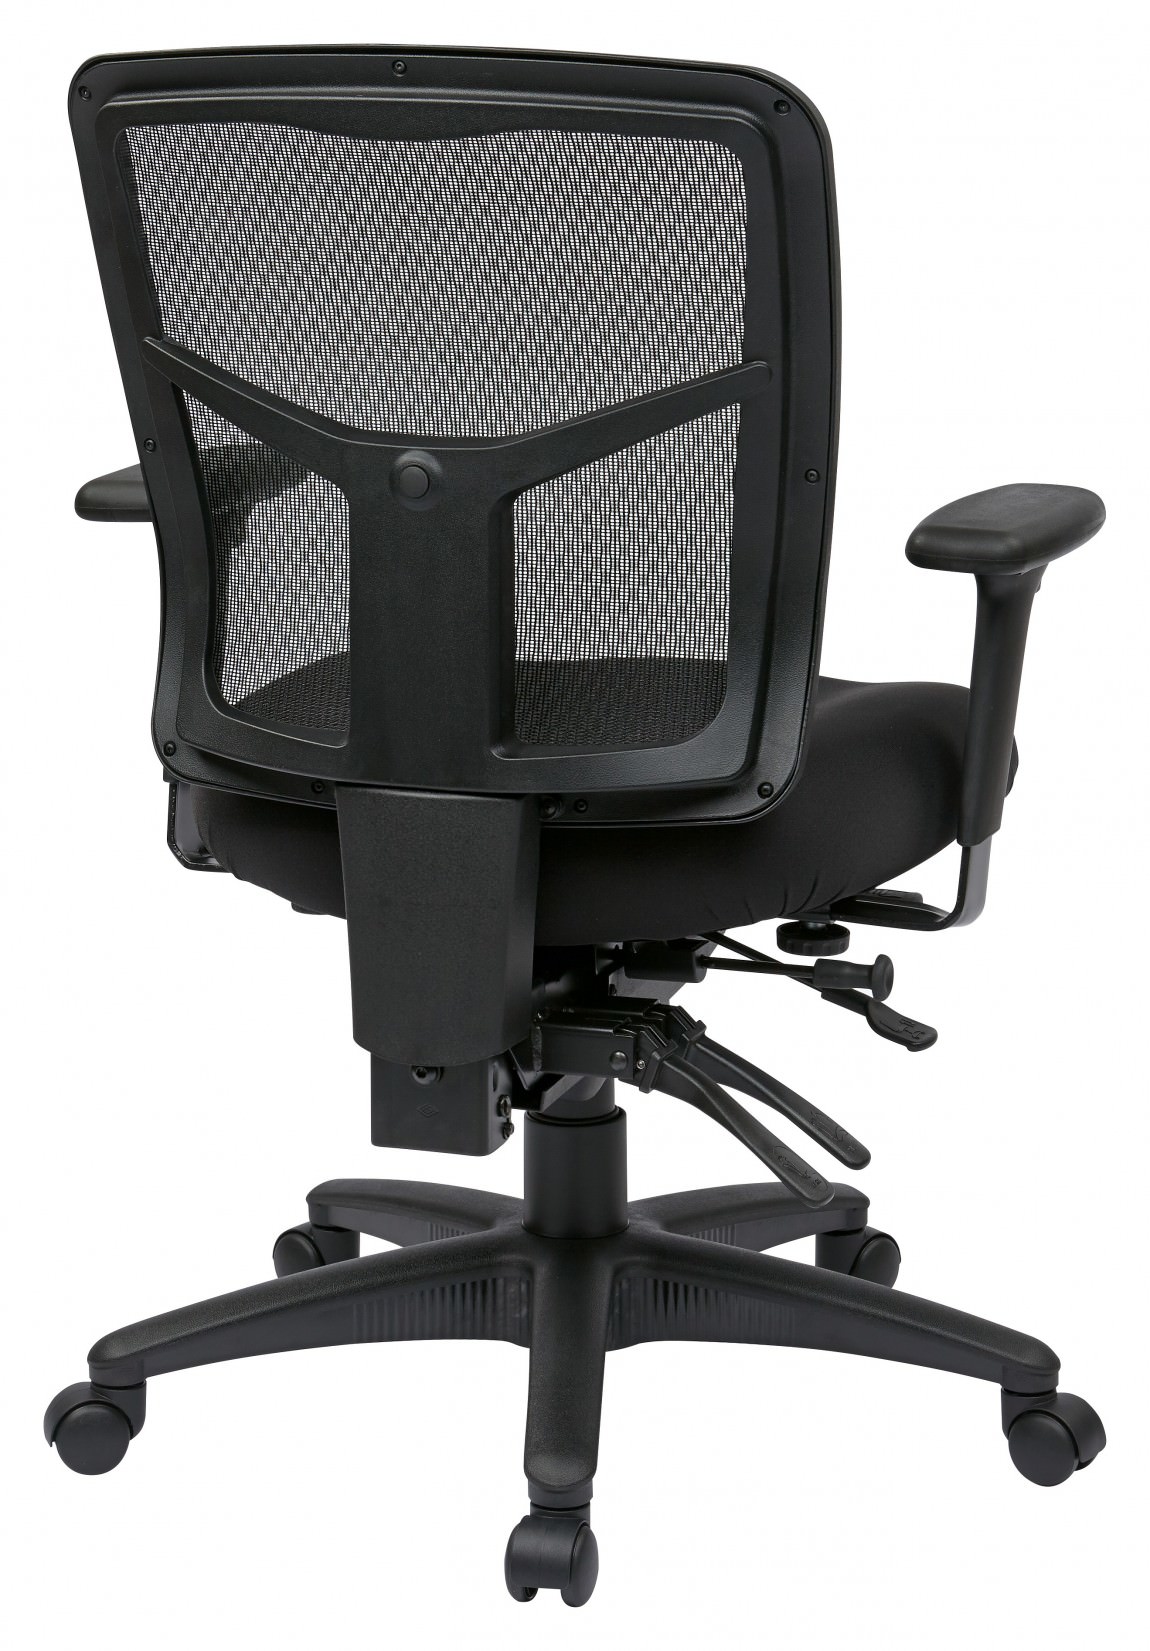 Mesh Back Task Chair with Arms